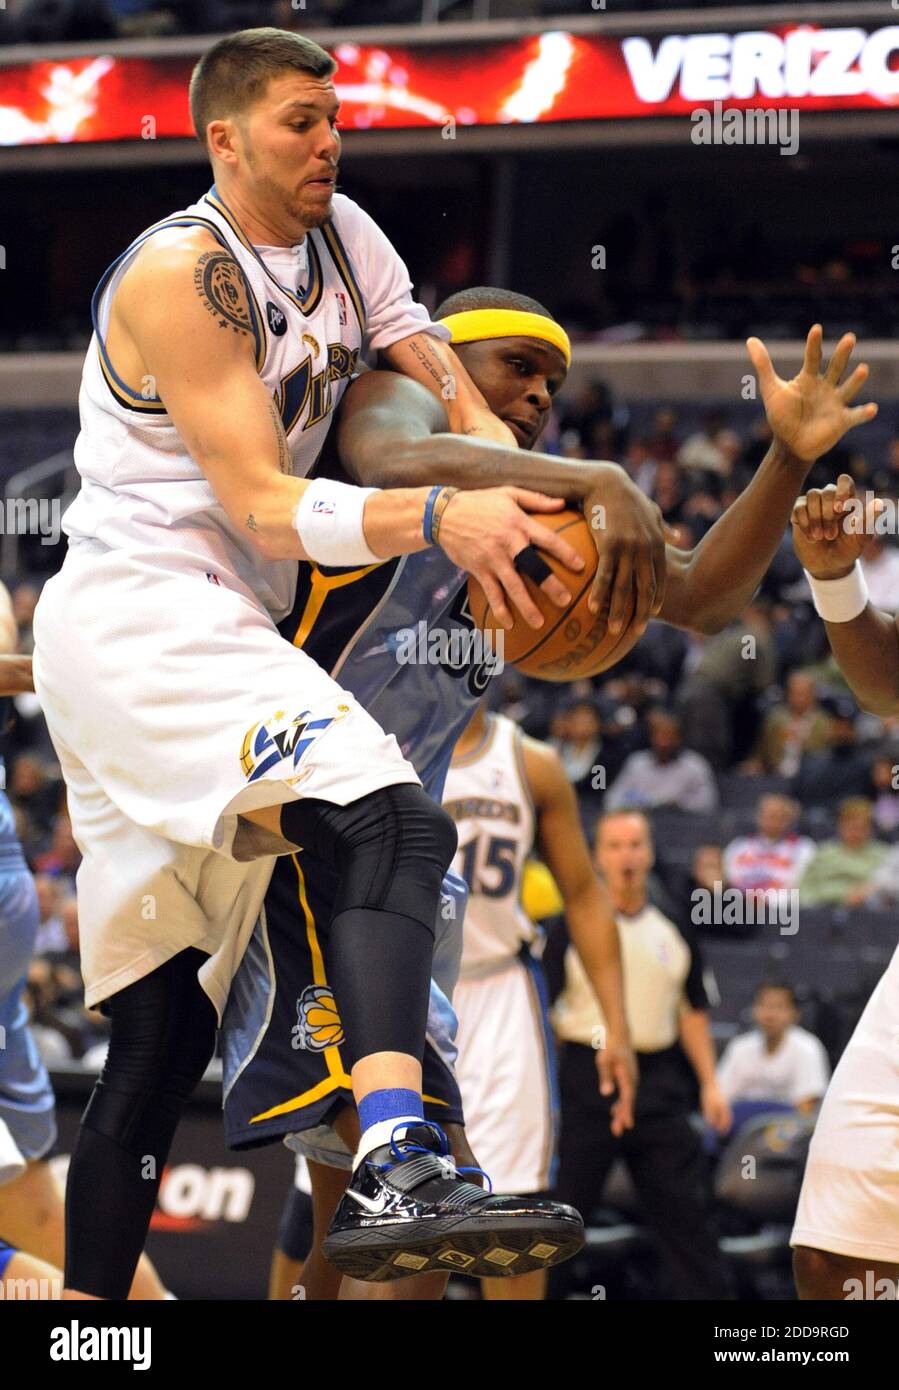 NO FILM, NO VIDEO, NO TV, NO DOCUMENTARY - Washington Wizards forward Mike Miller, left, and Memphis Grizzlies forward Zach Randolph battle for a rebound during the first quarter at the Verizon Center in Washington, D.C., Wednesday, February 24, 2010. Photo by Chuck Myers/MCT/ABACAPRESS.COM Stock Photo